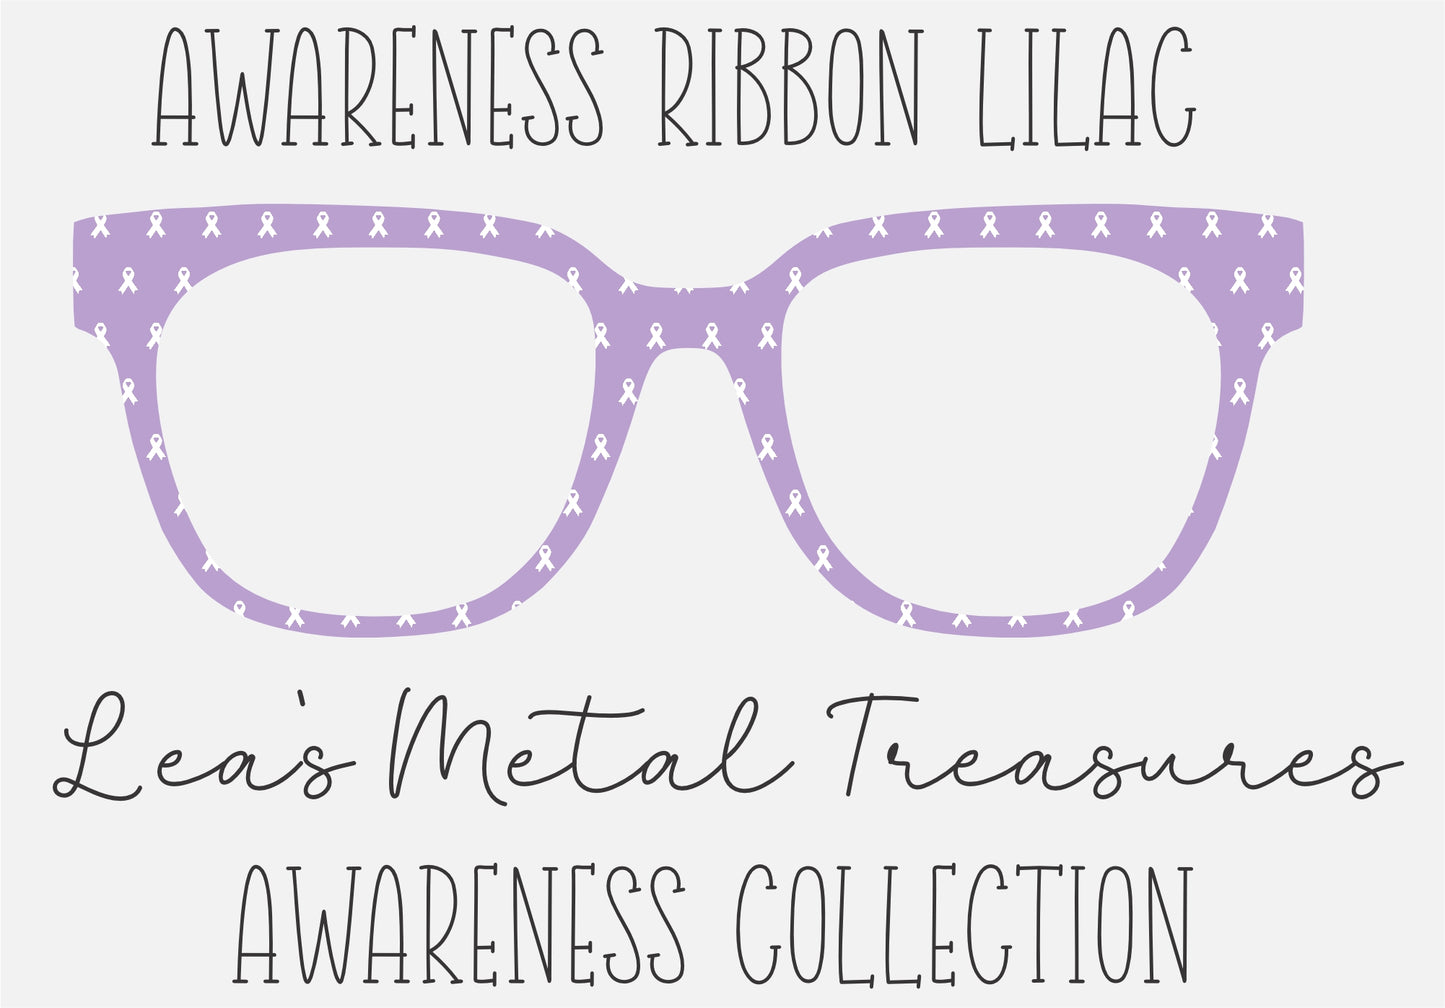 AWARENESS RIBBON LILAC Eyewear Frame Toppers COMES WITH MAGNETS